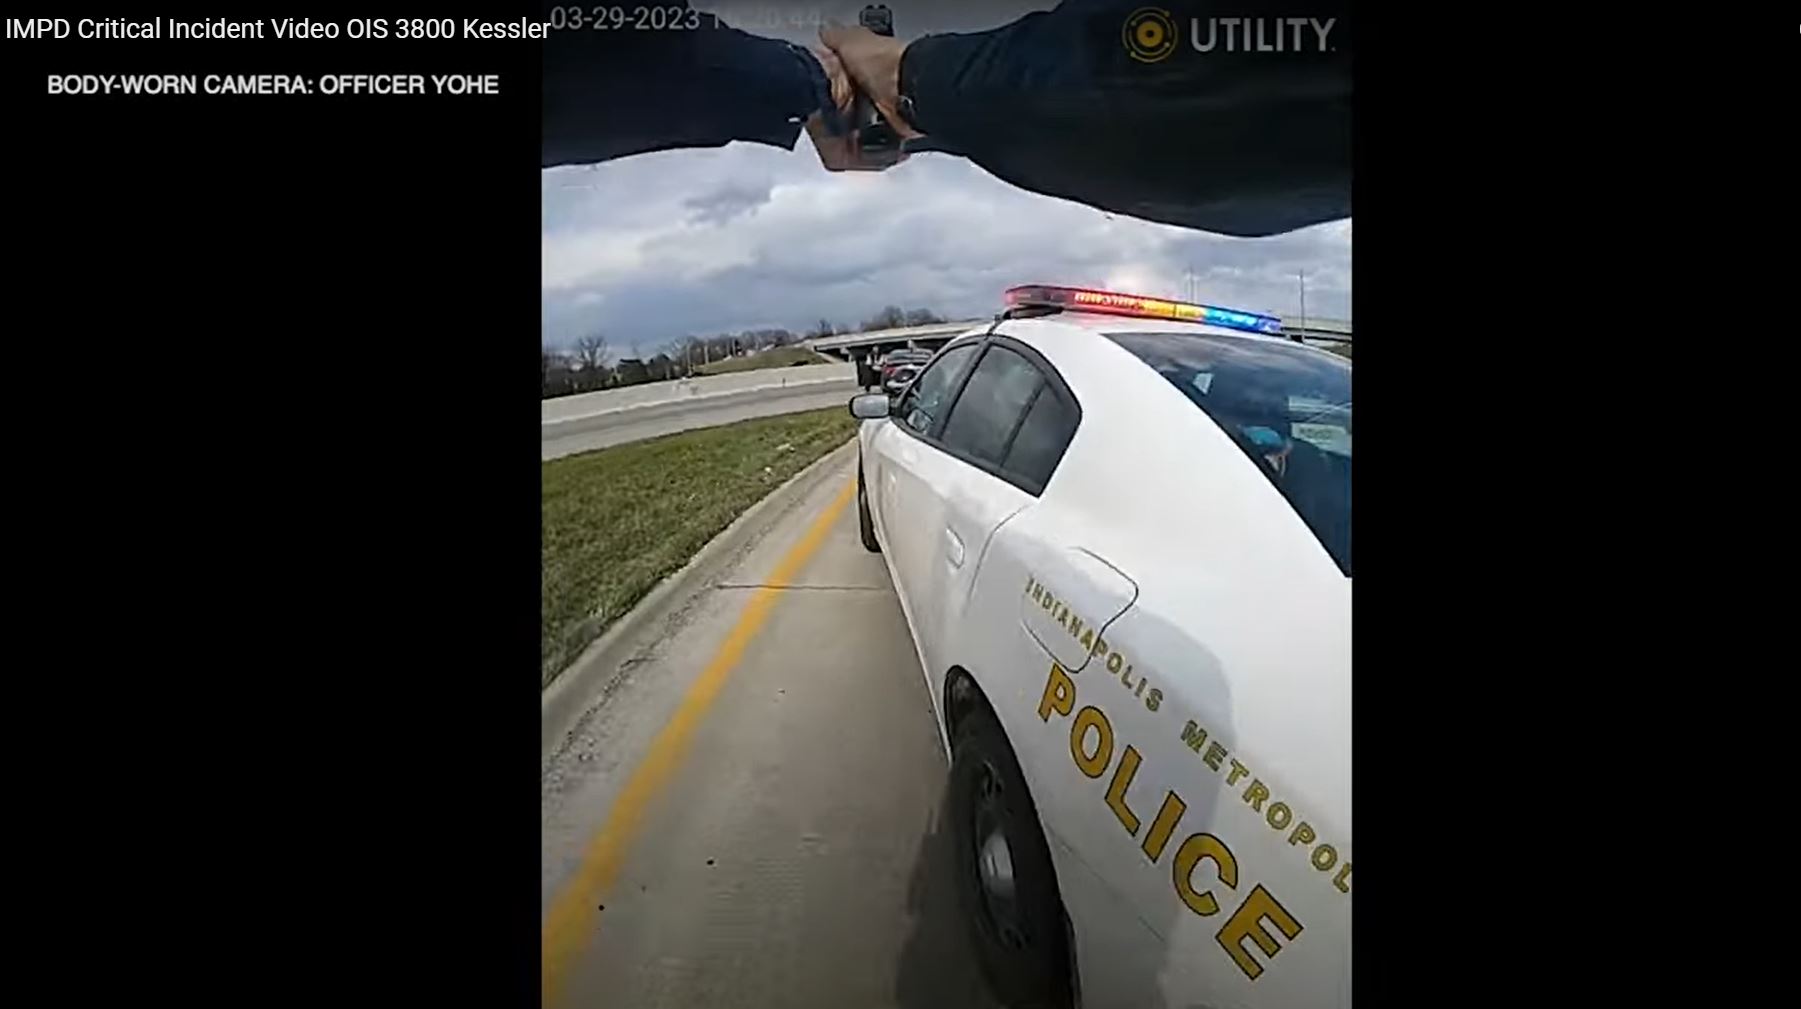 IMPD shares video of I-65 police shooting